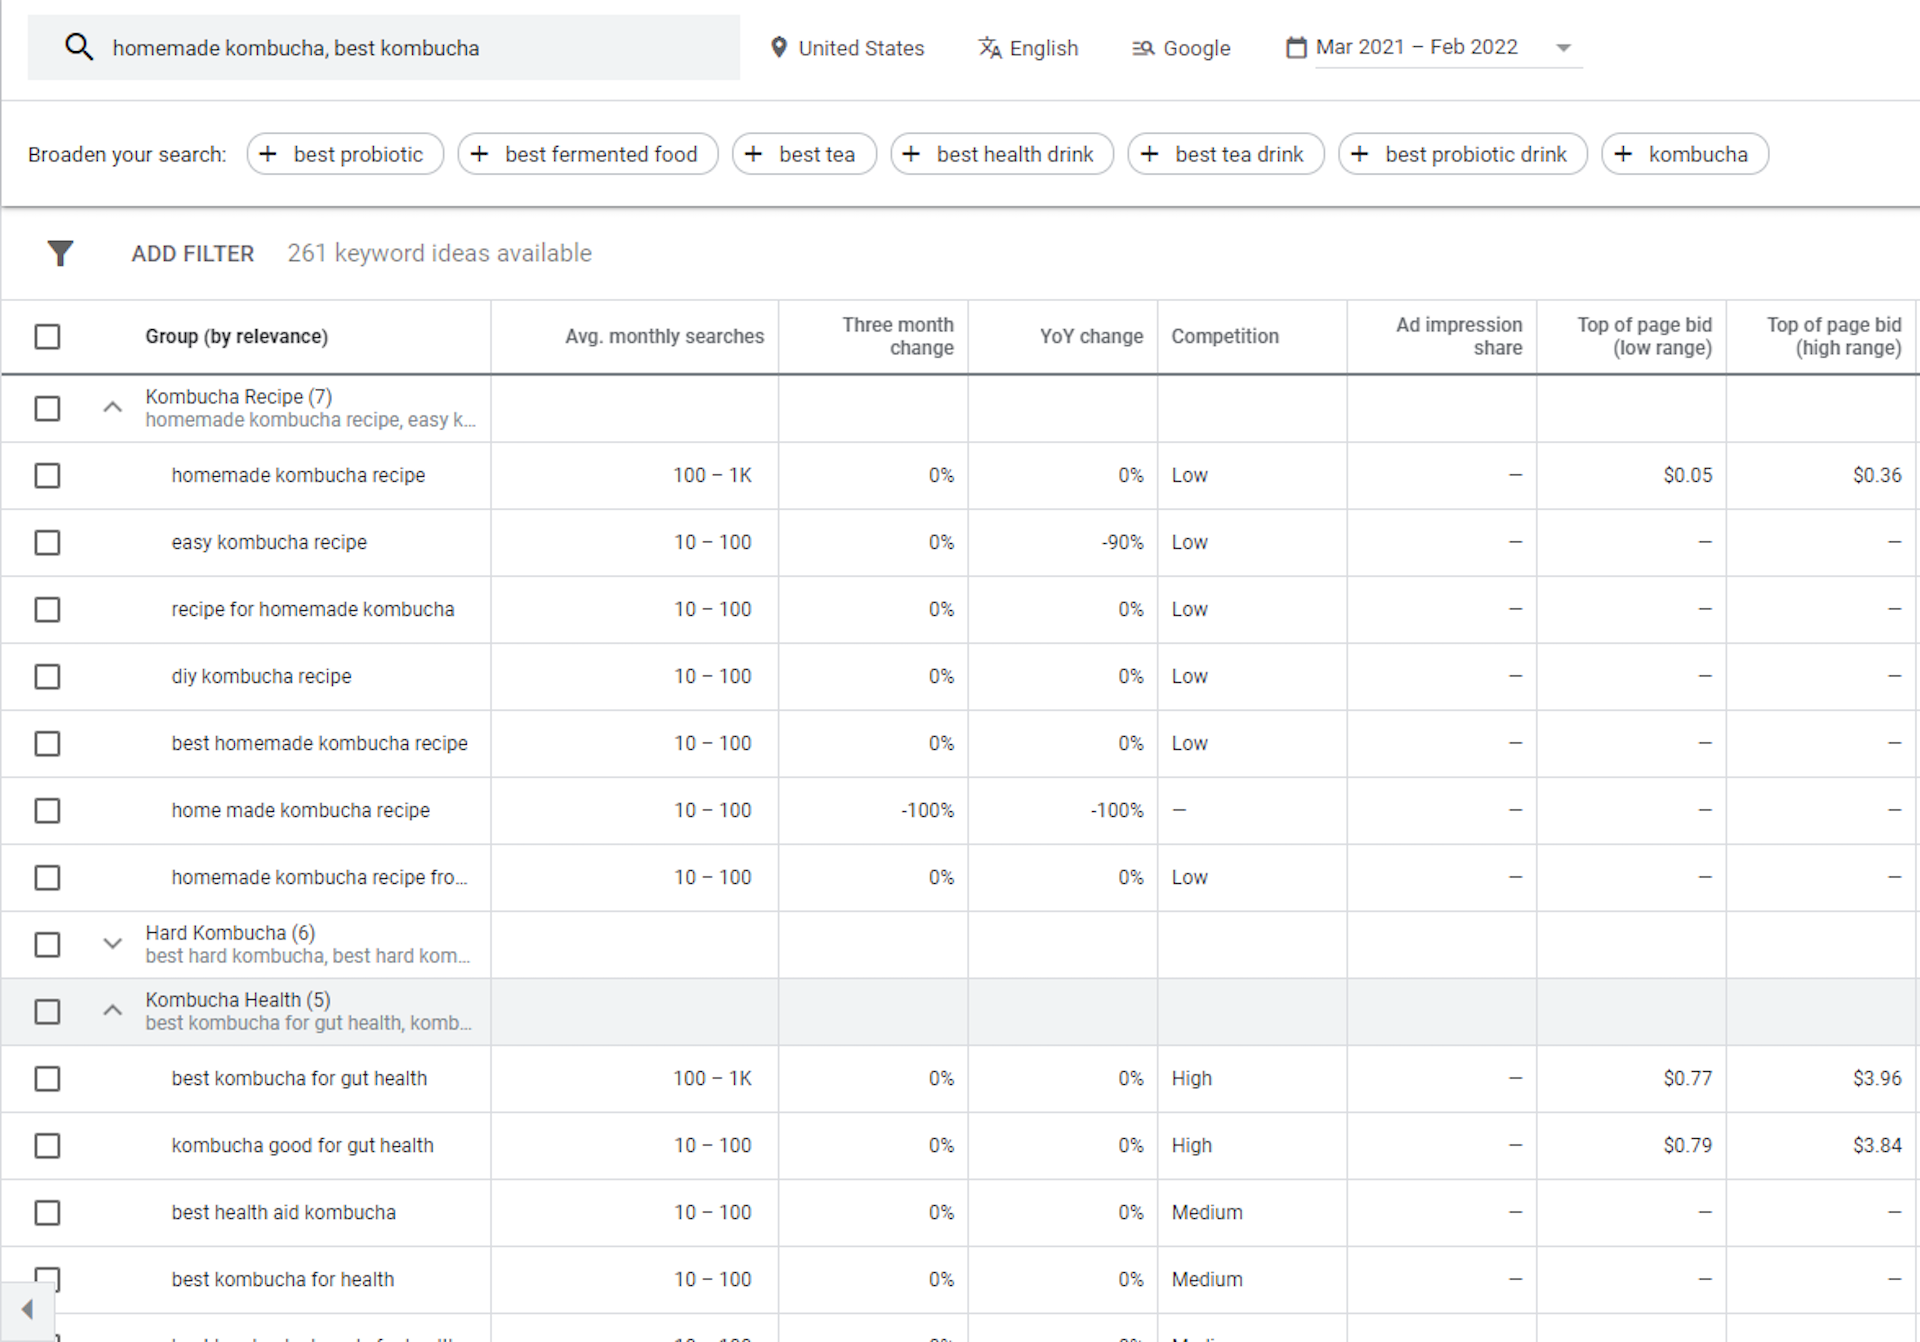 Google organizes keywords directly for you by category.